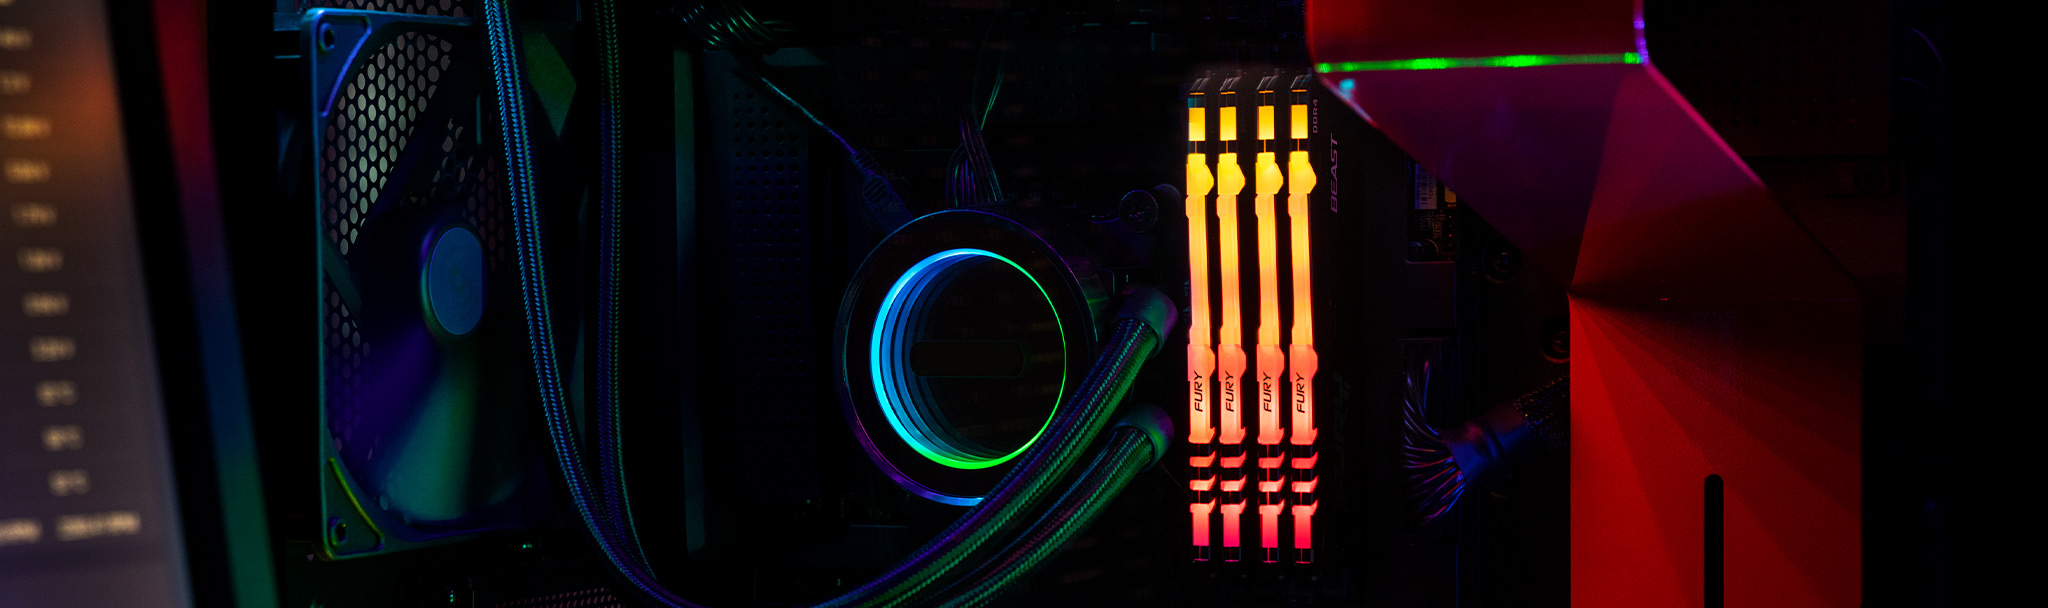 Customisable RGB lighting with aggressive styling